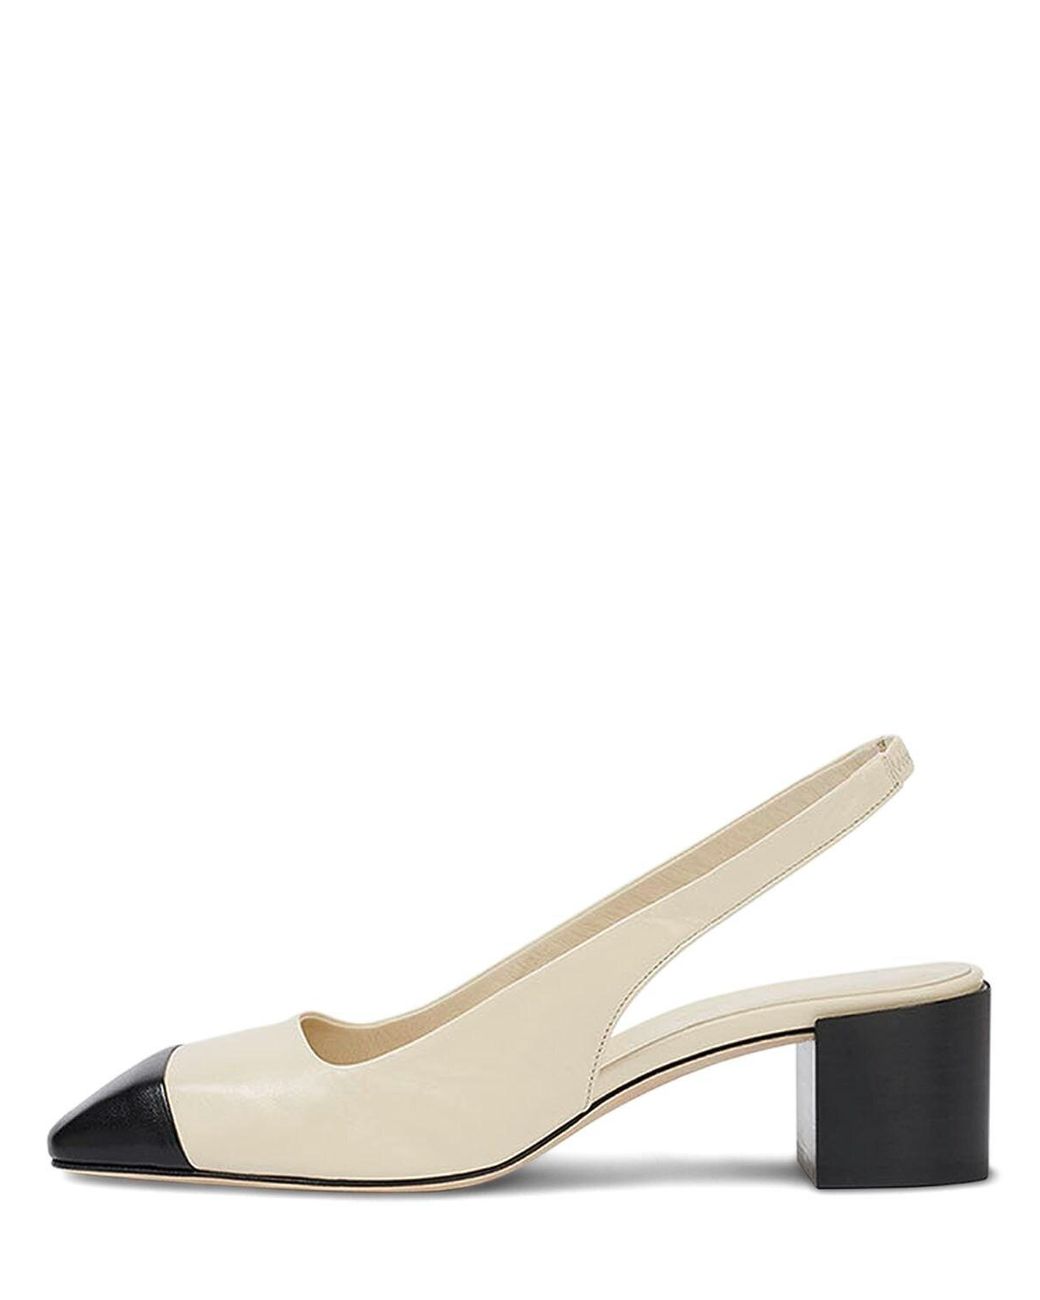 Aeyde 45mm Alessia Leather Slingback Pumps | Lyst